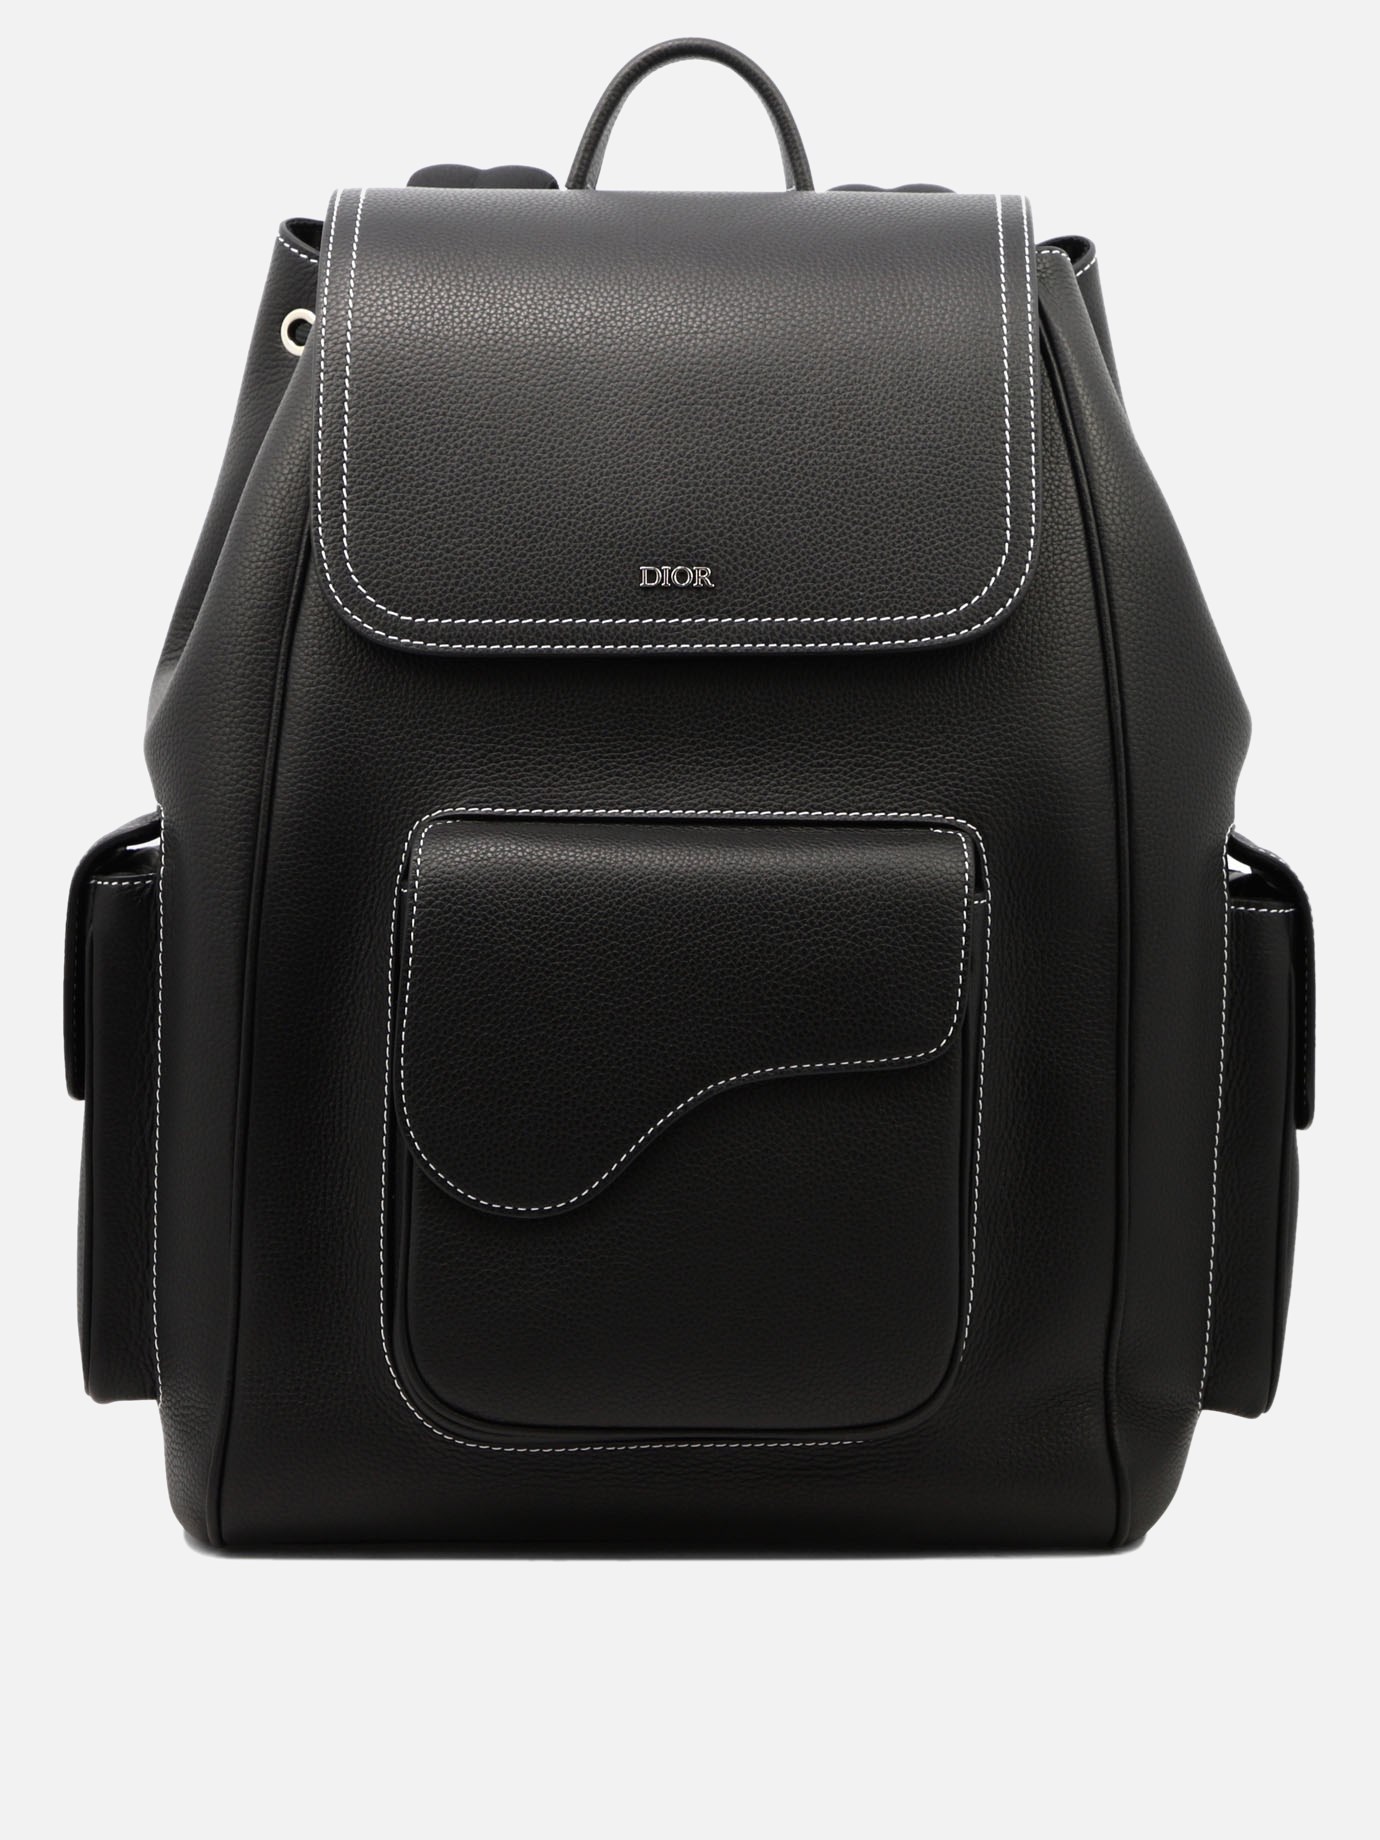  Saddle  backpack by Dior